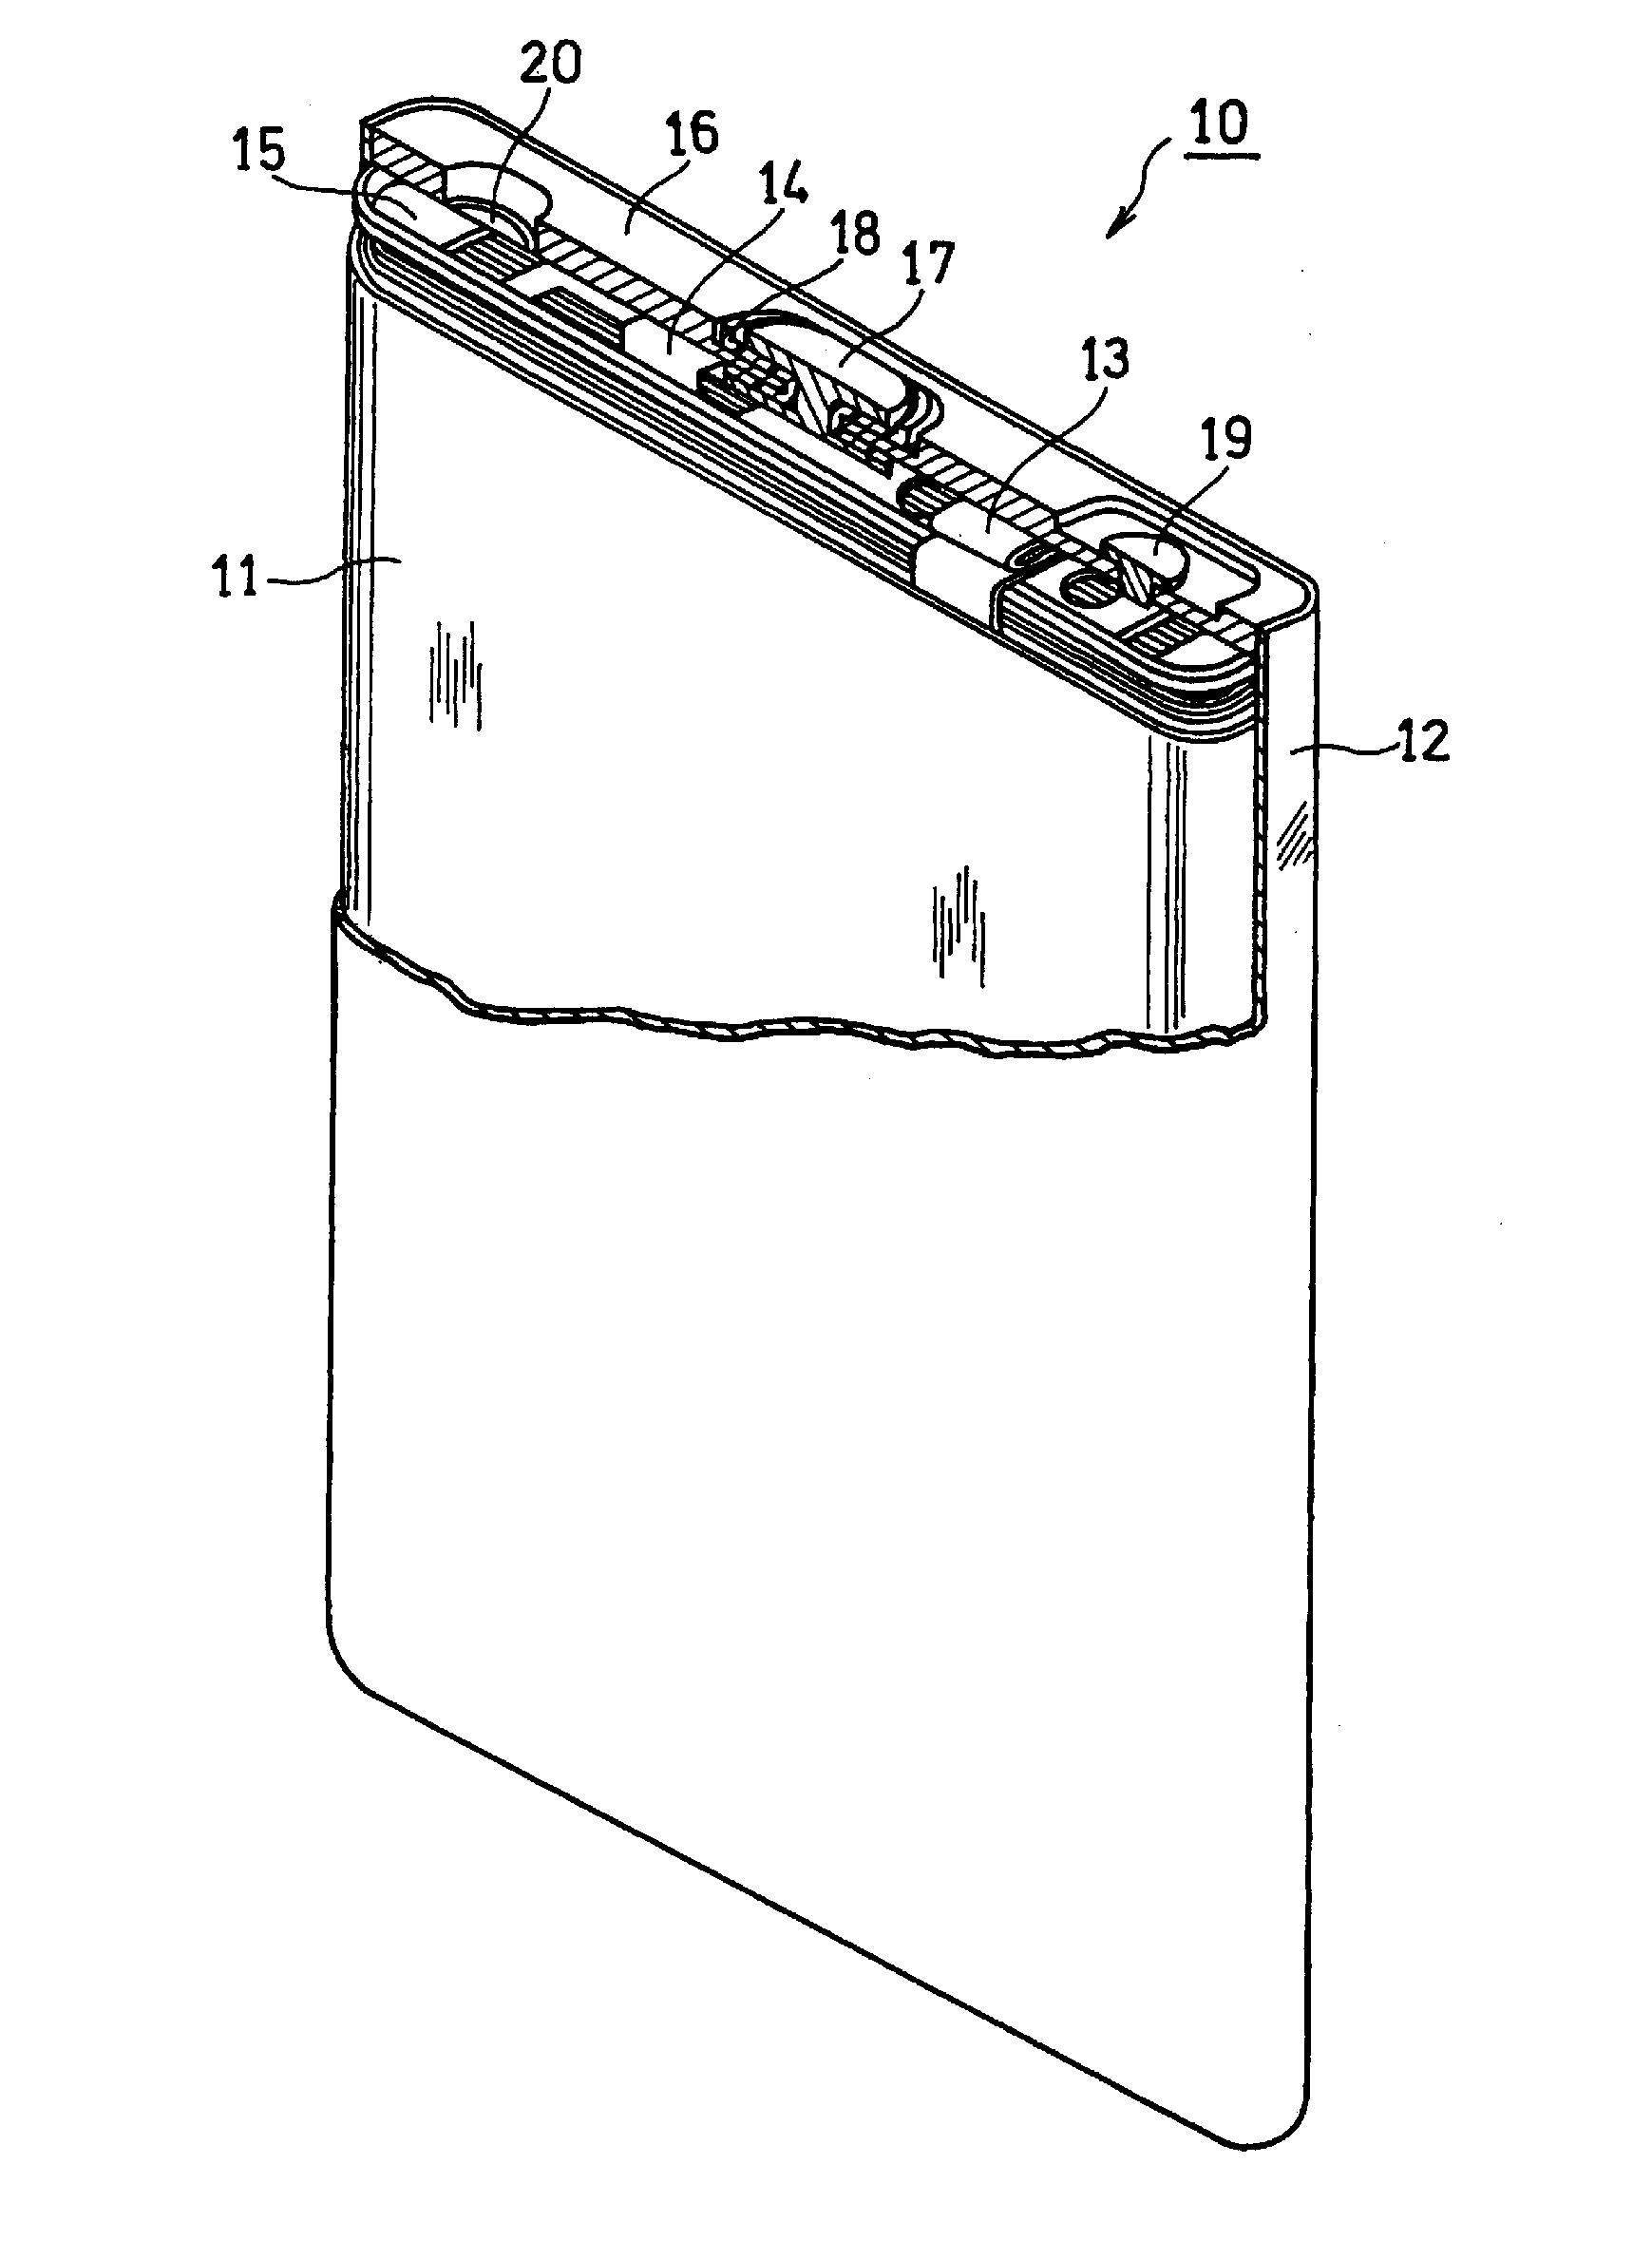 Non-aqueous electrolyte secondary battery and method for producing the same